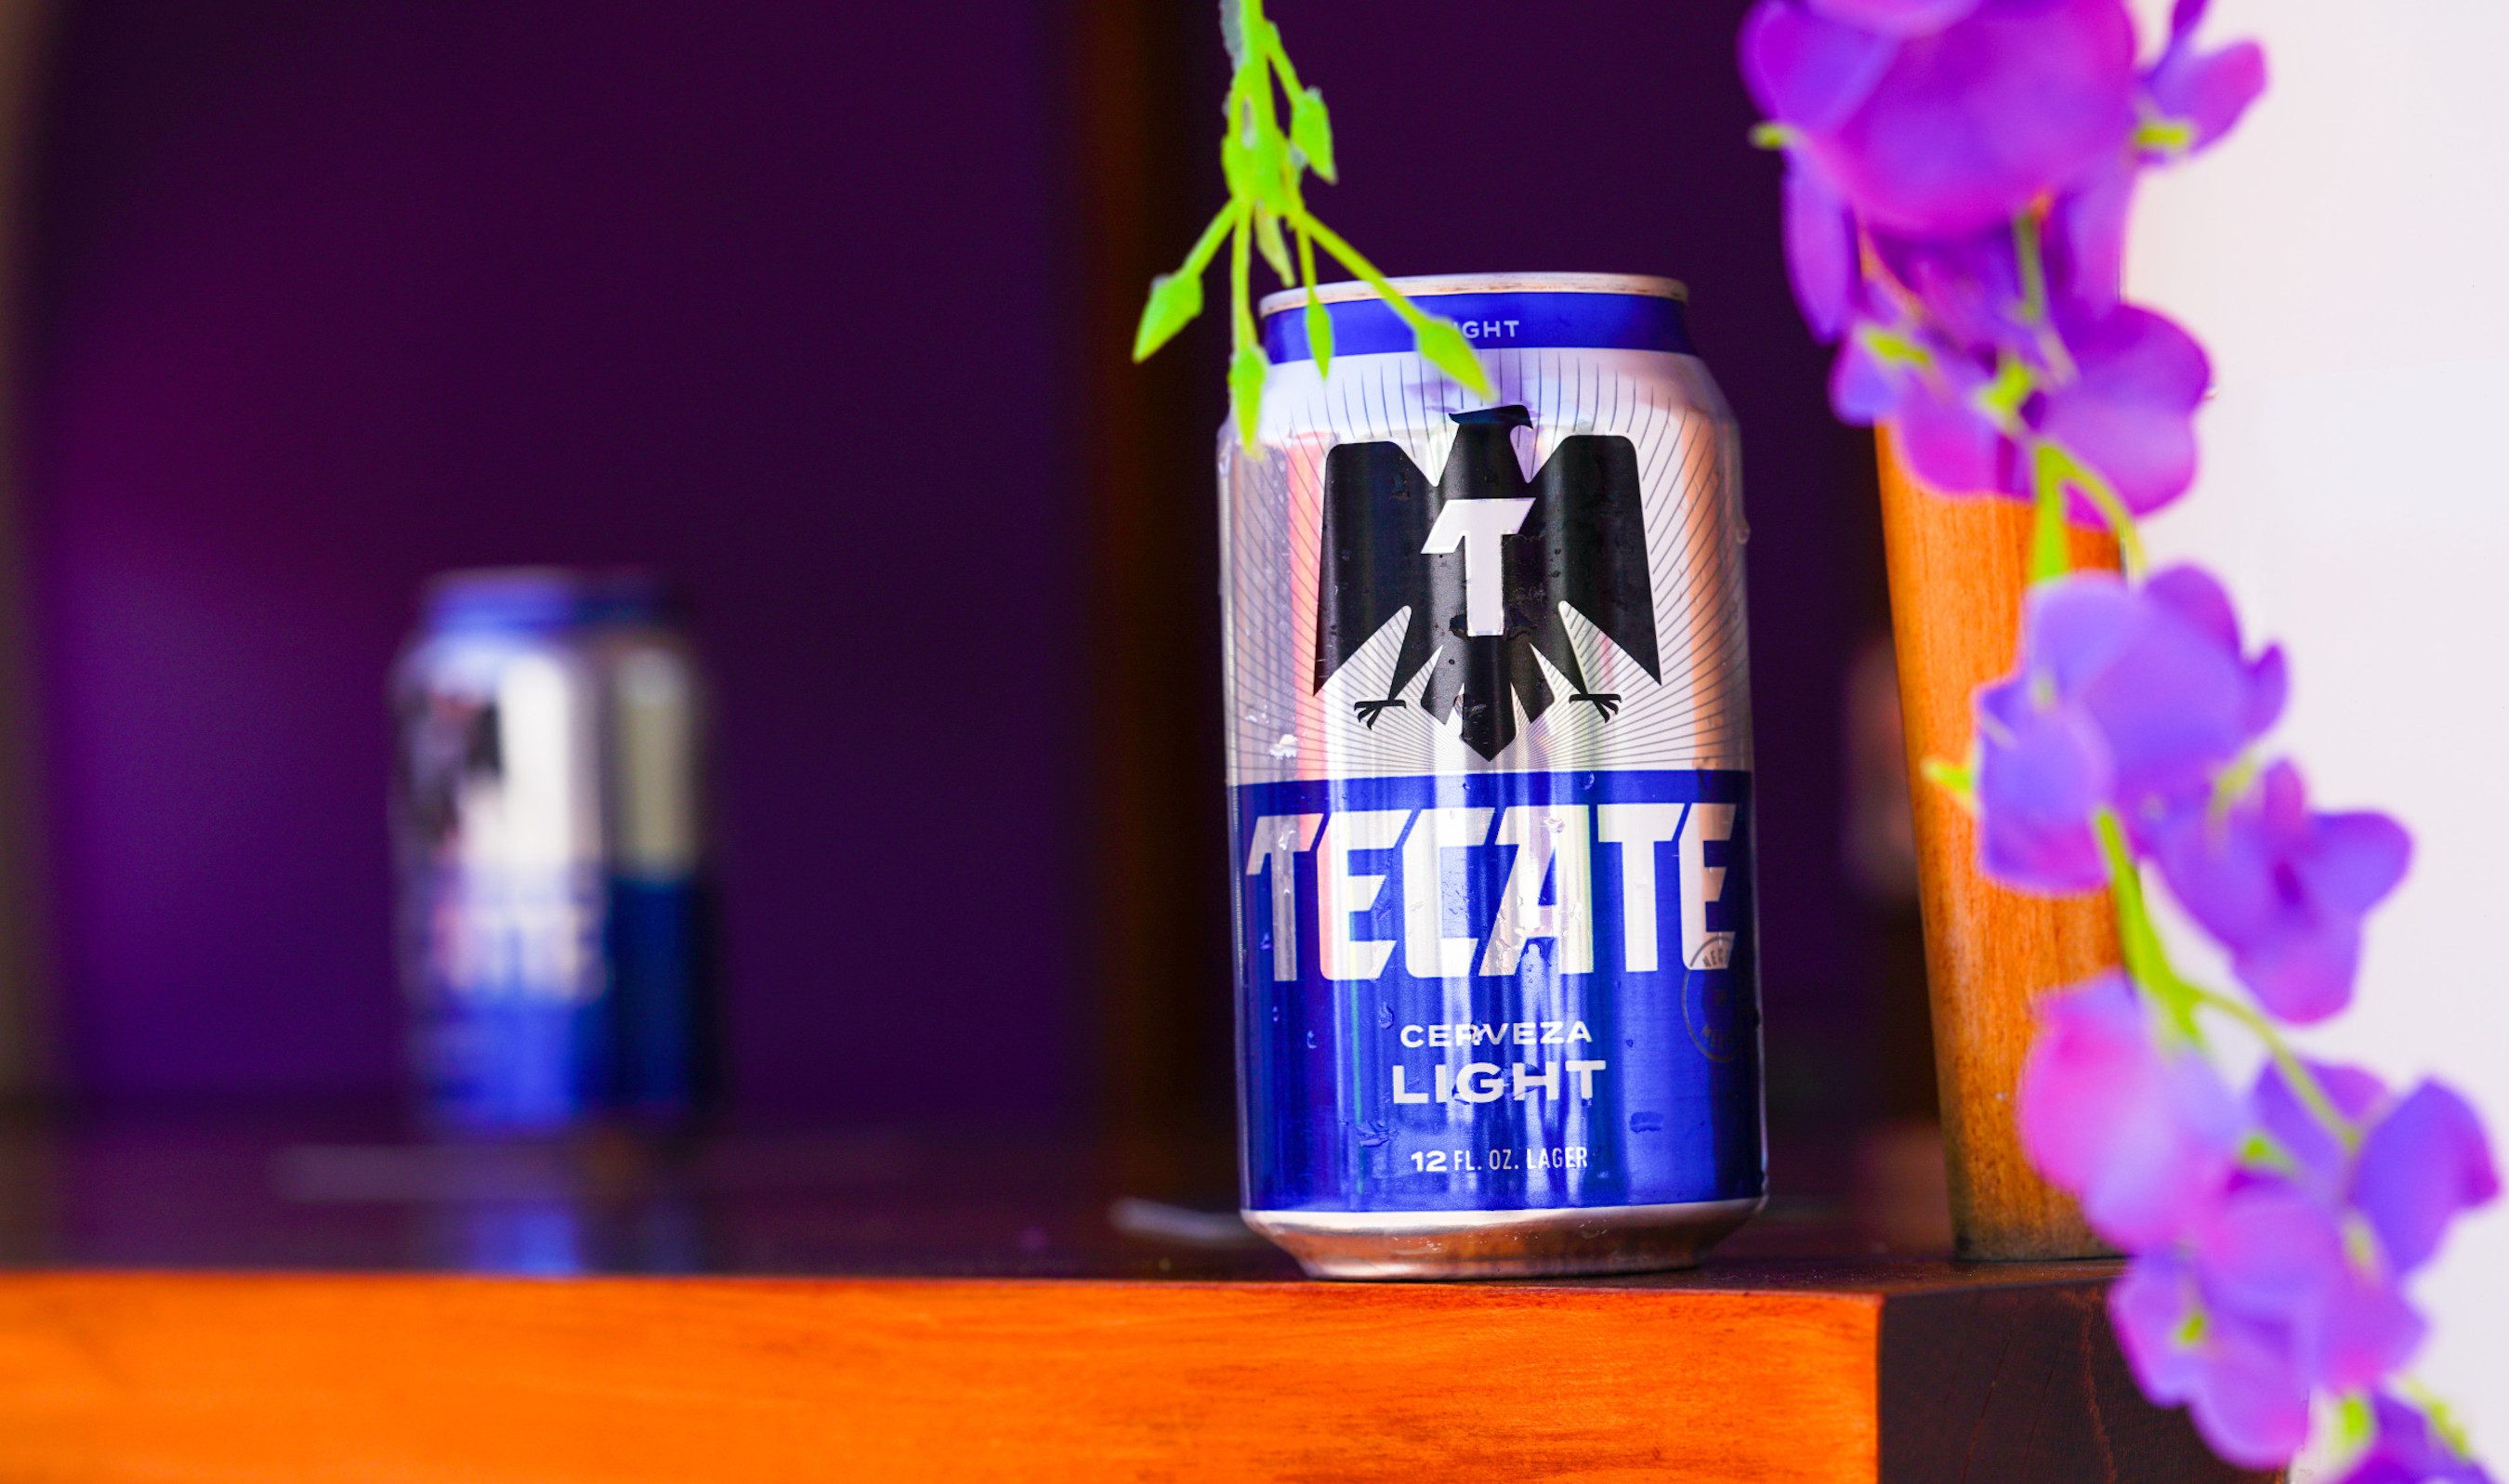 Tecate Light is a refreshing choice with a light citrus flavor and aroma.